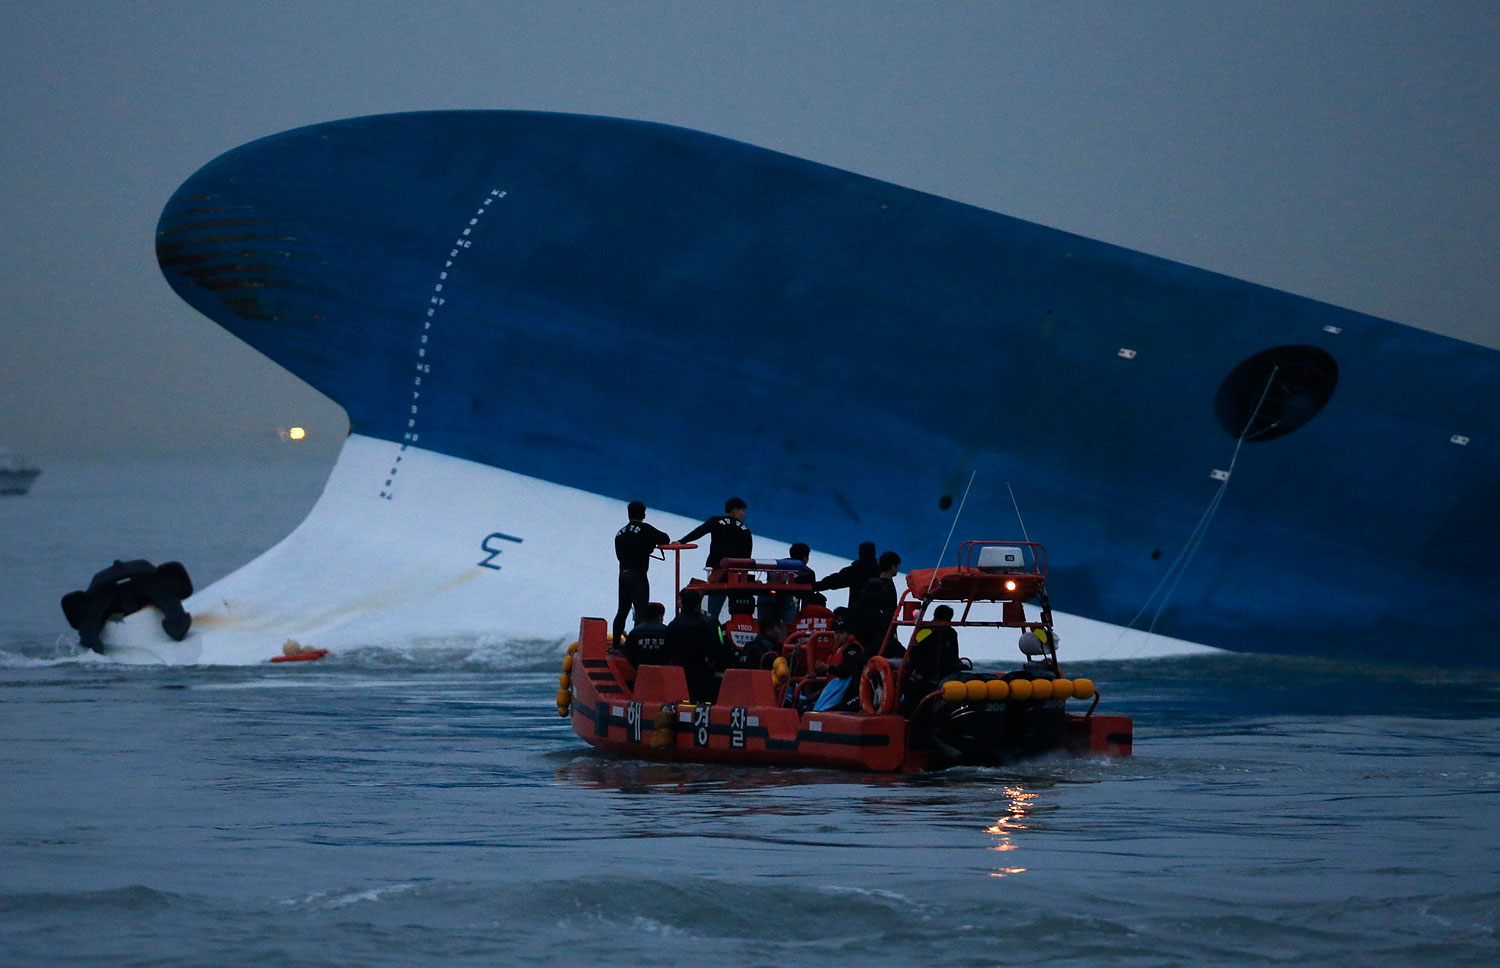 Maritime police search for missing passengers in front of the South Korean ferry Sewol which sank at the sea off Jindo April 16, 2014.